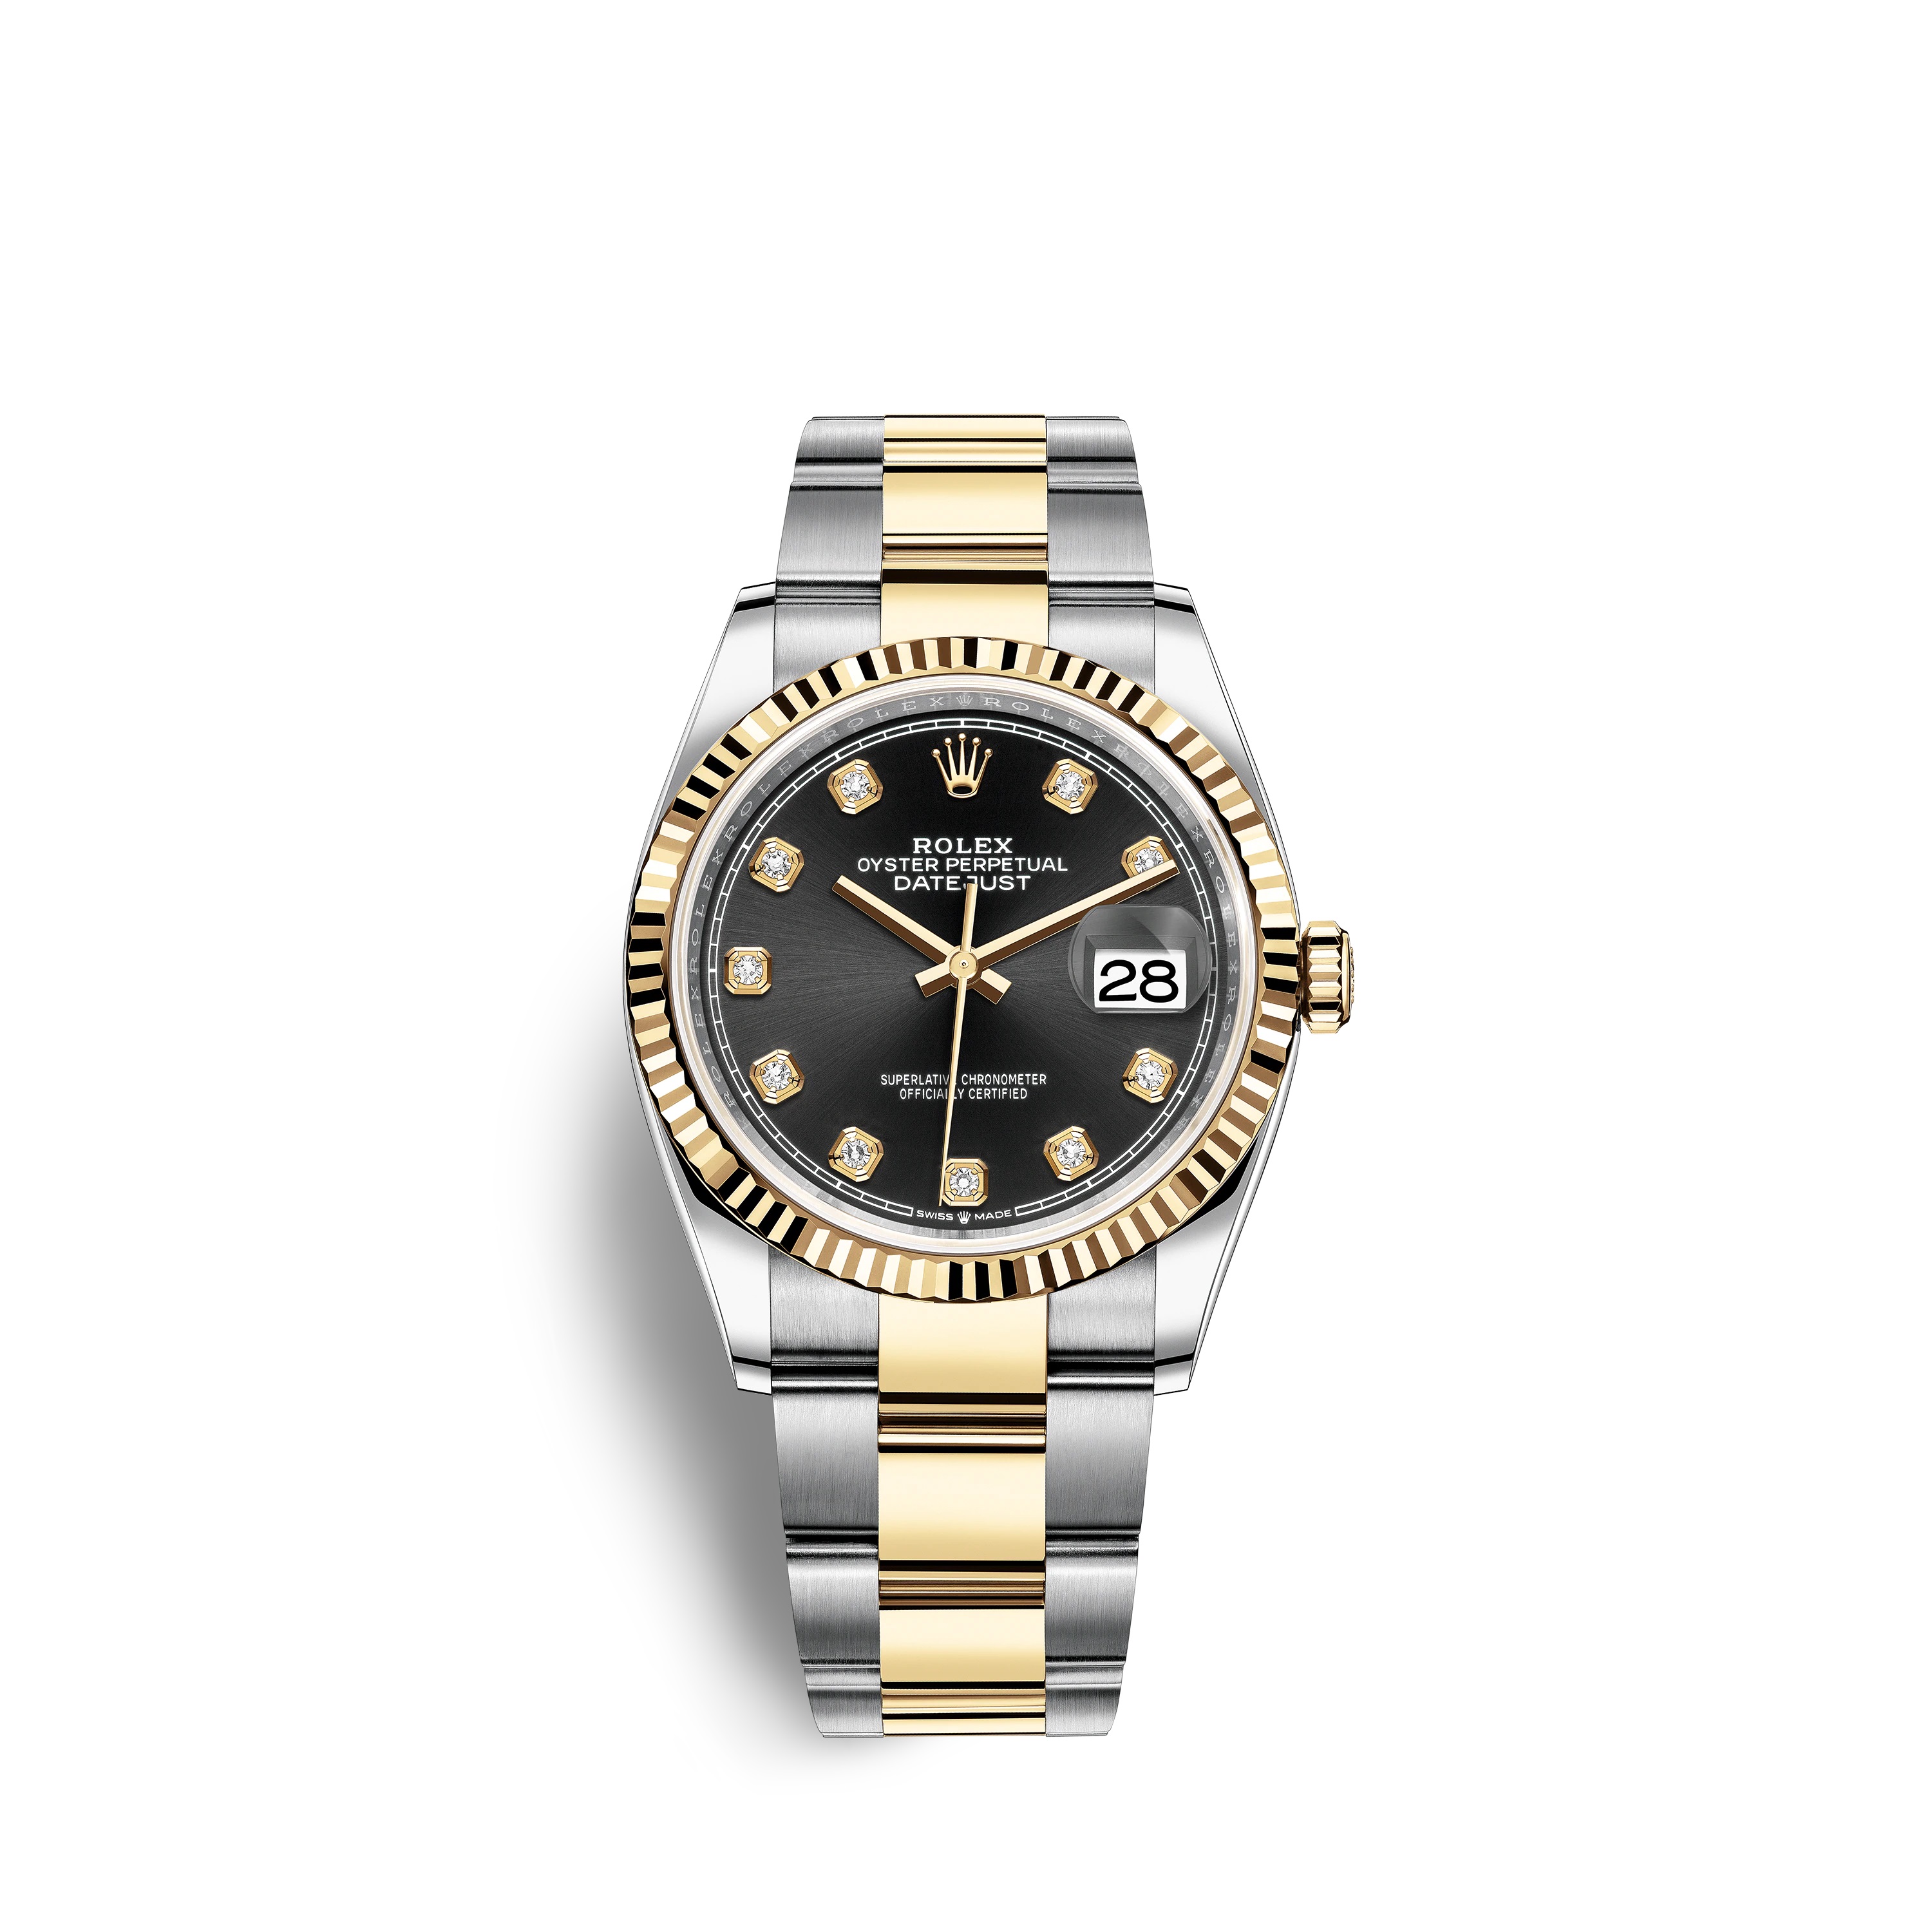 Datejust 36 126233 Gold & Stainless Steel Watch (Black Set with Diamonds) - Click Image to Close